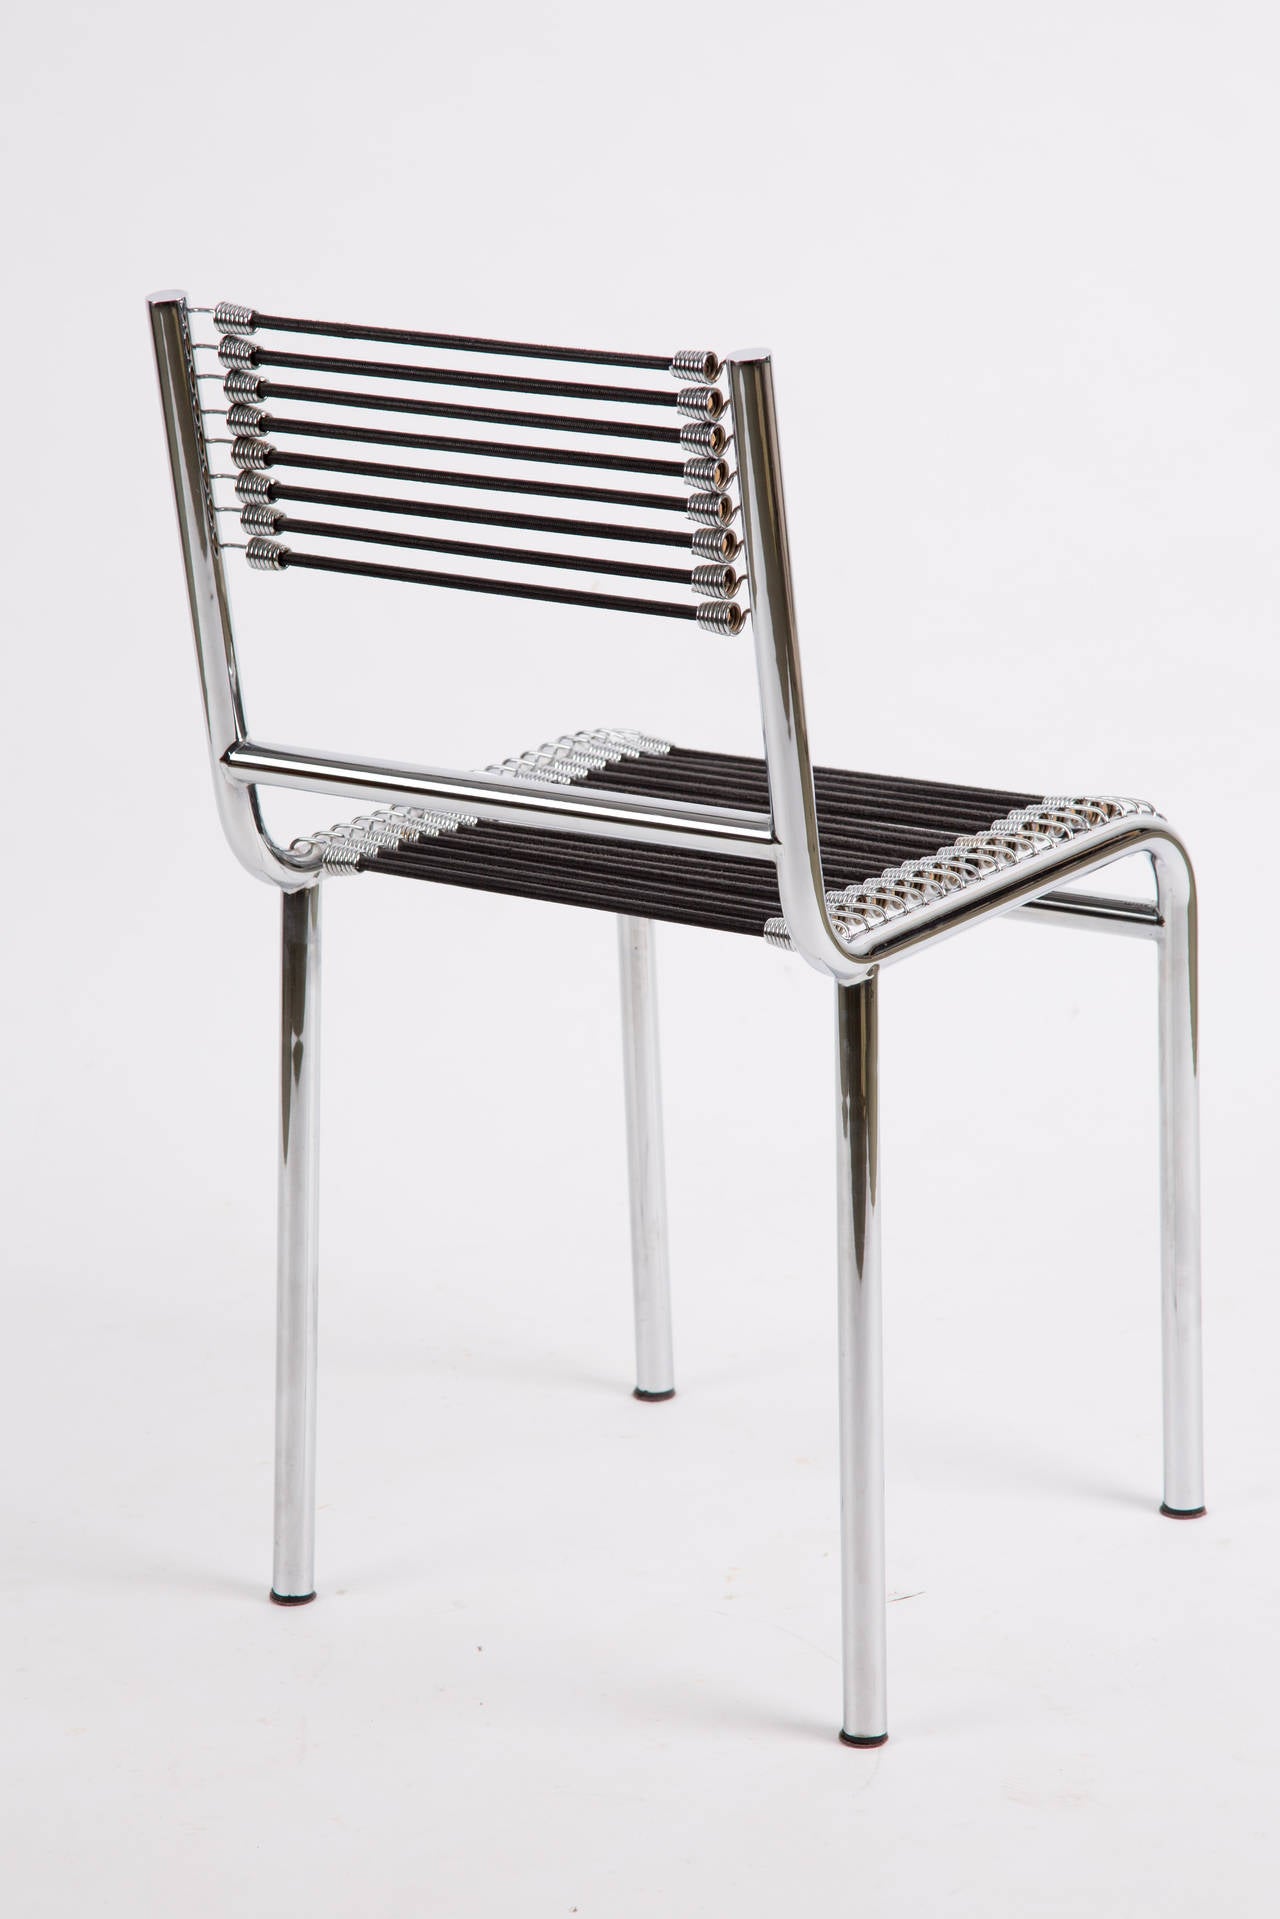 French rene herbst chrome plated chairs